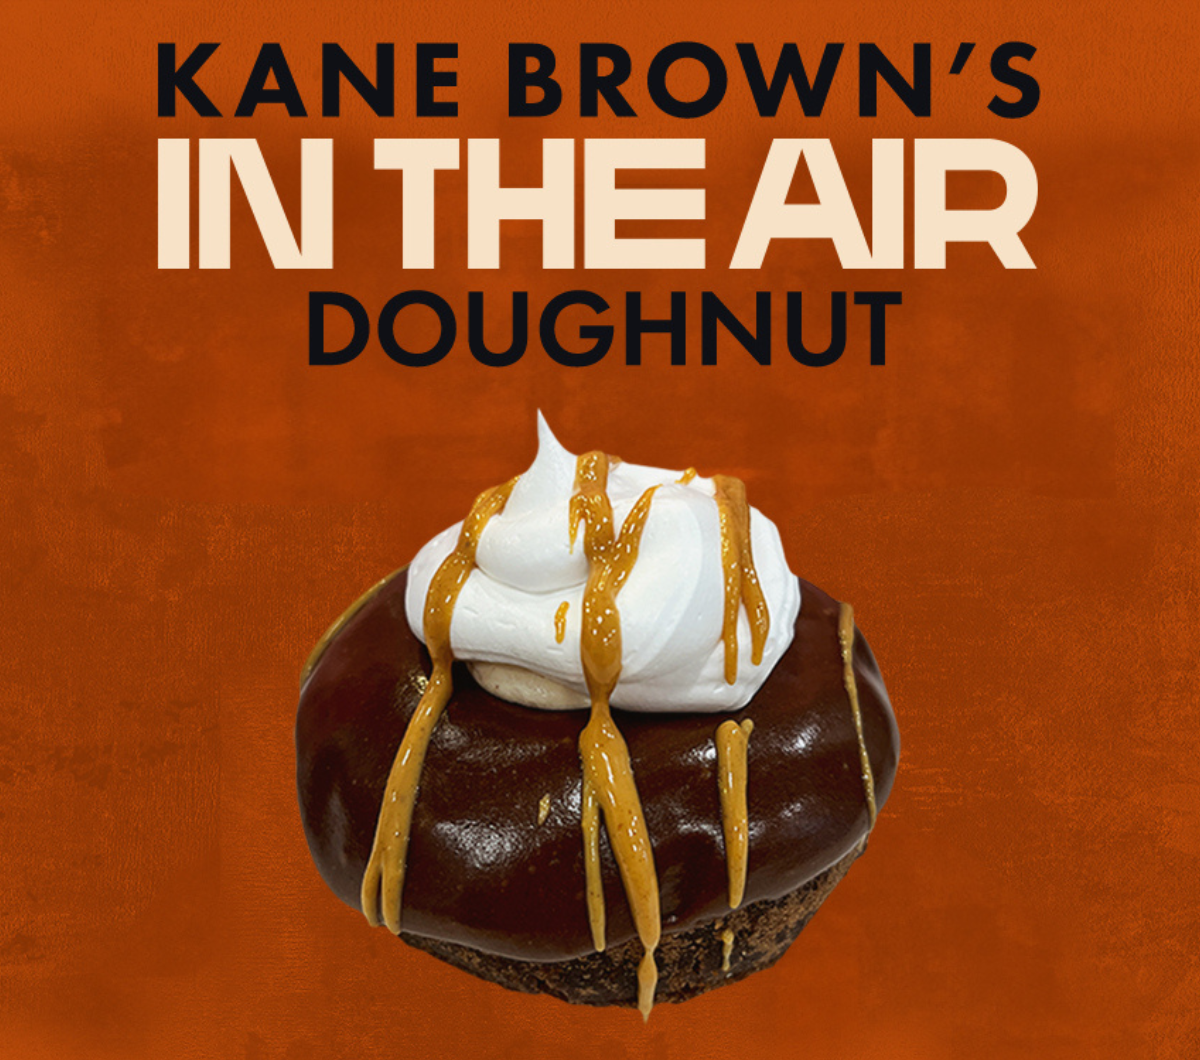 Kane Brown Partners With Voodoo Doughnut For Limited Edition Doughnut